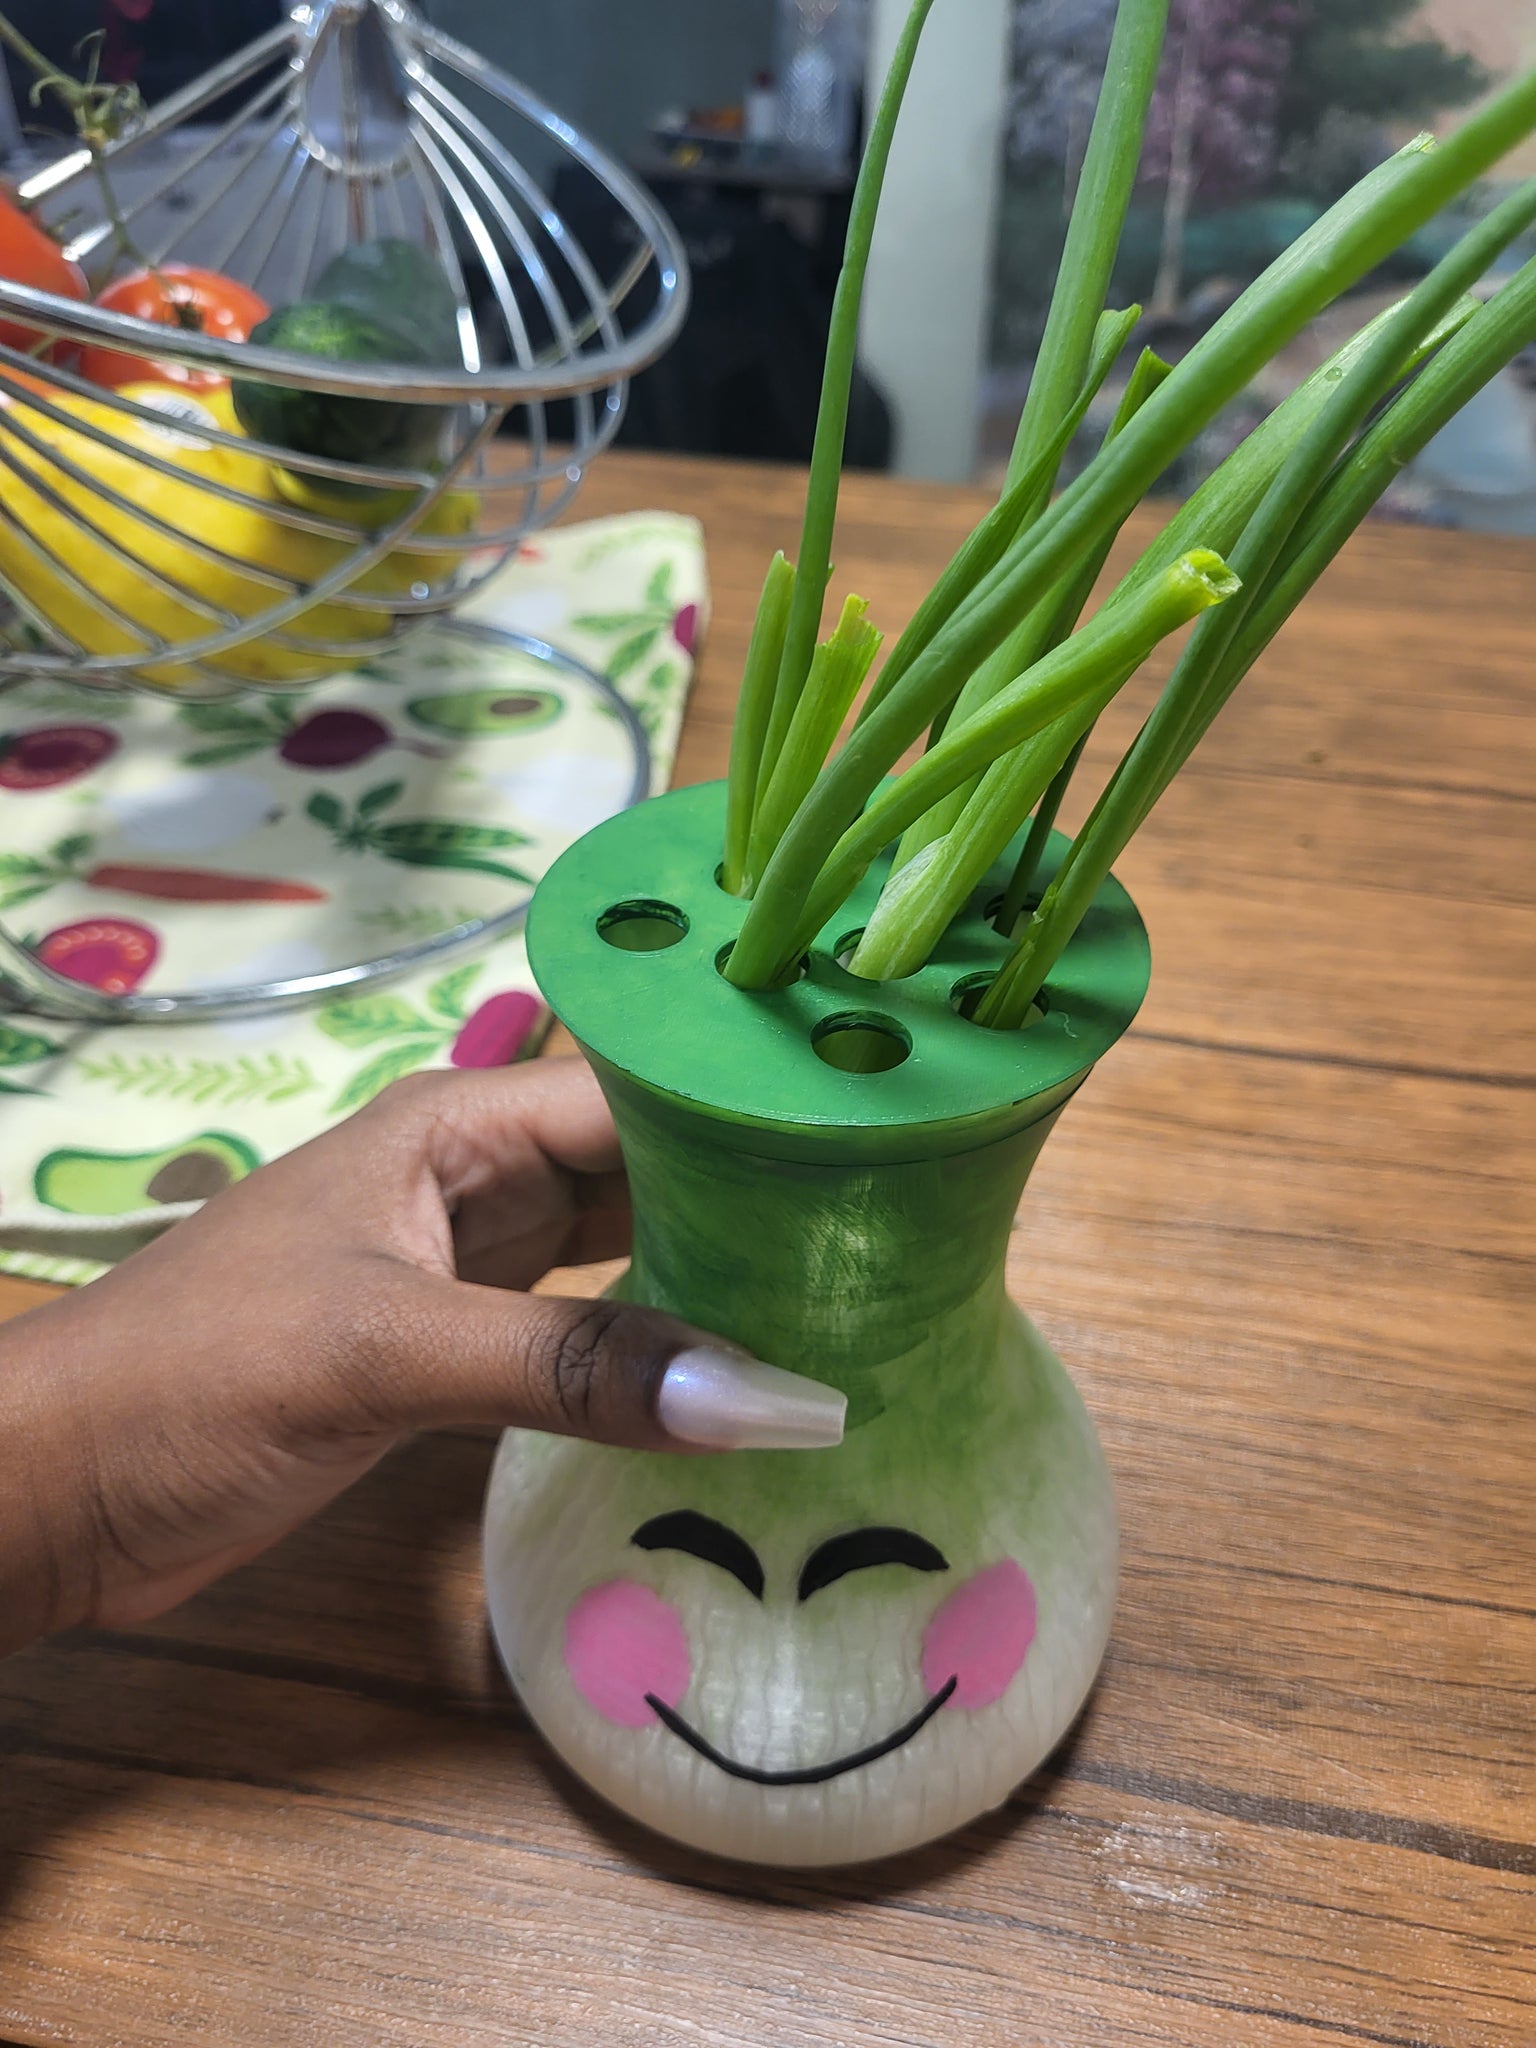 New Product Added- Green Onion Holder